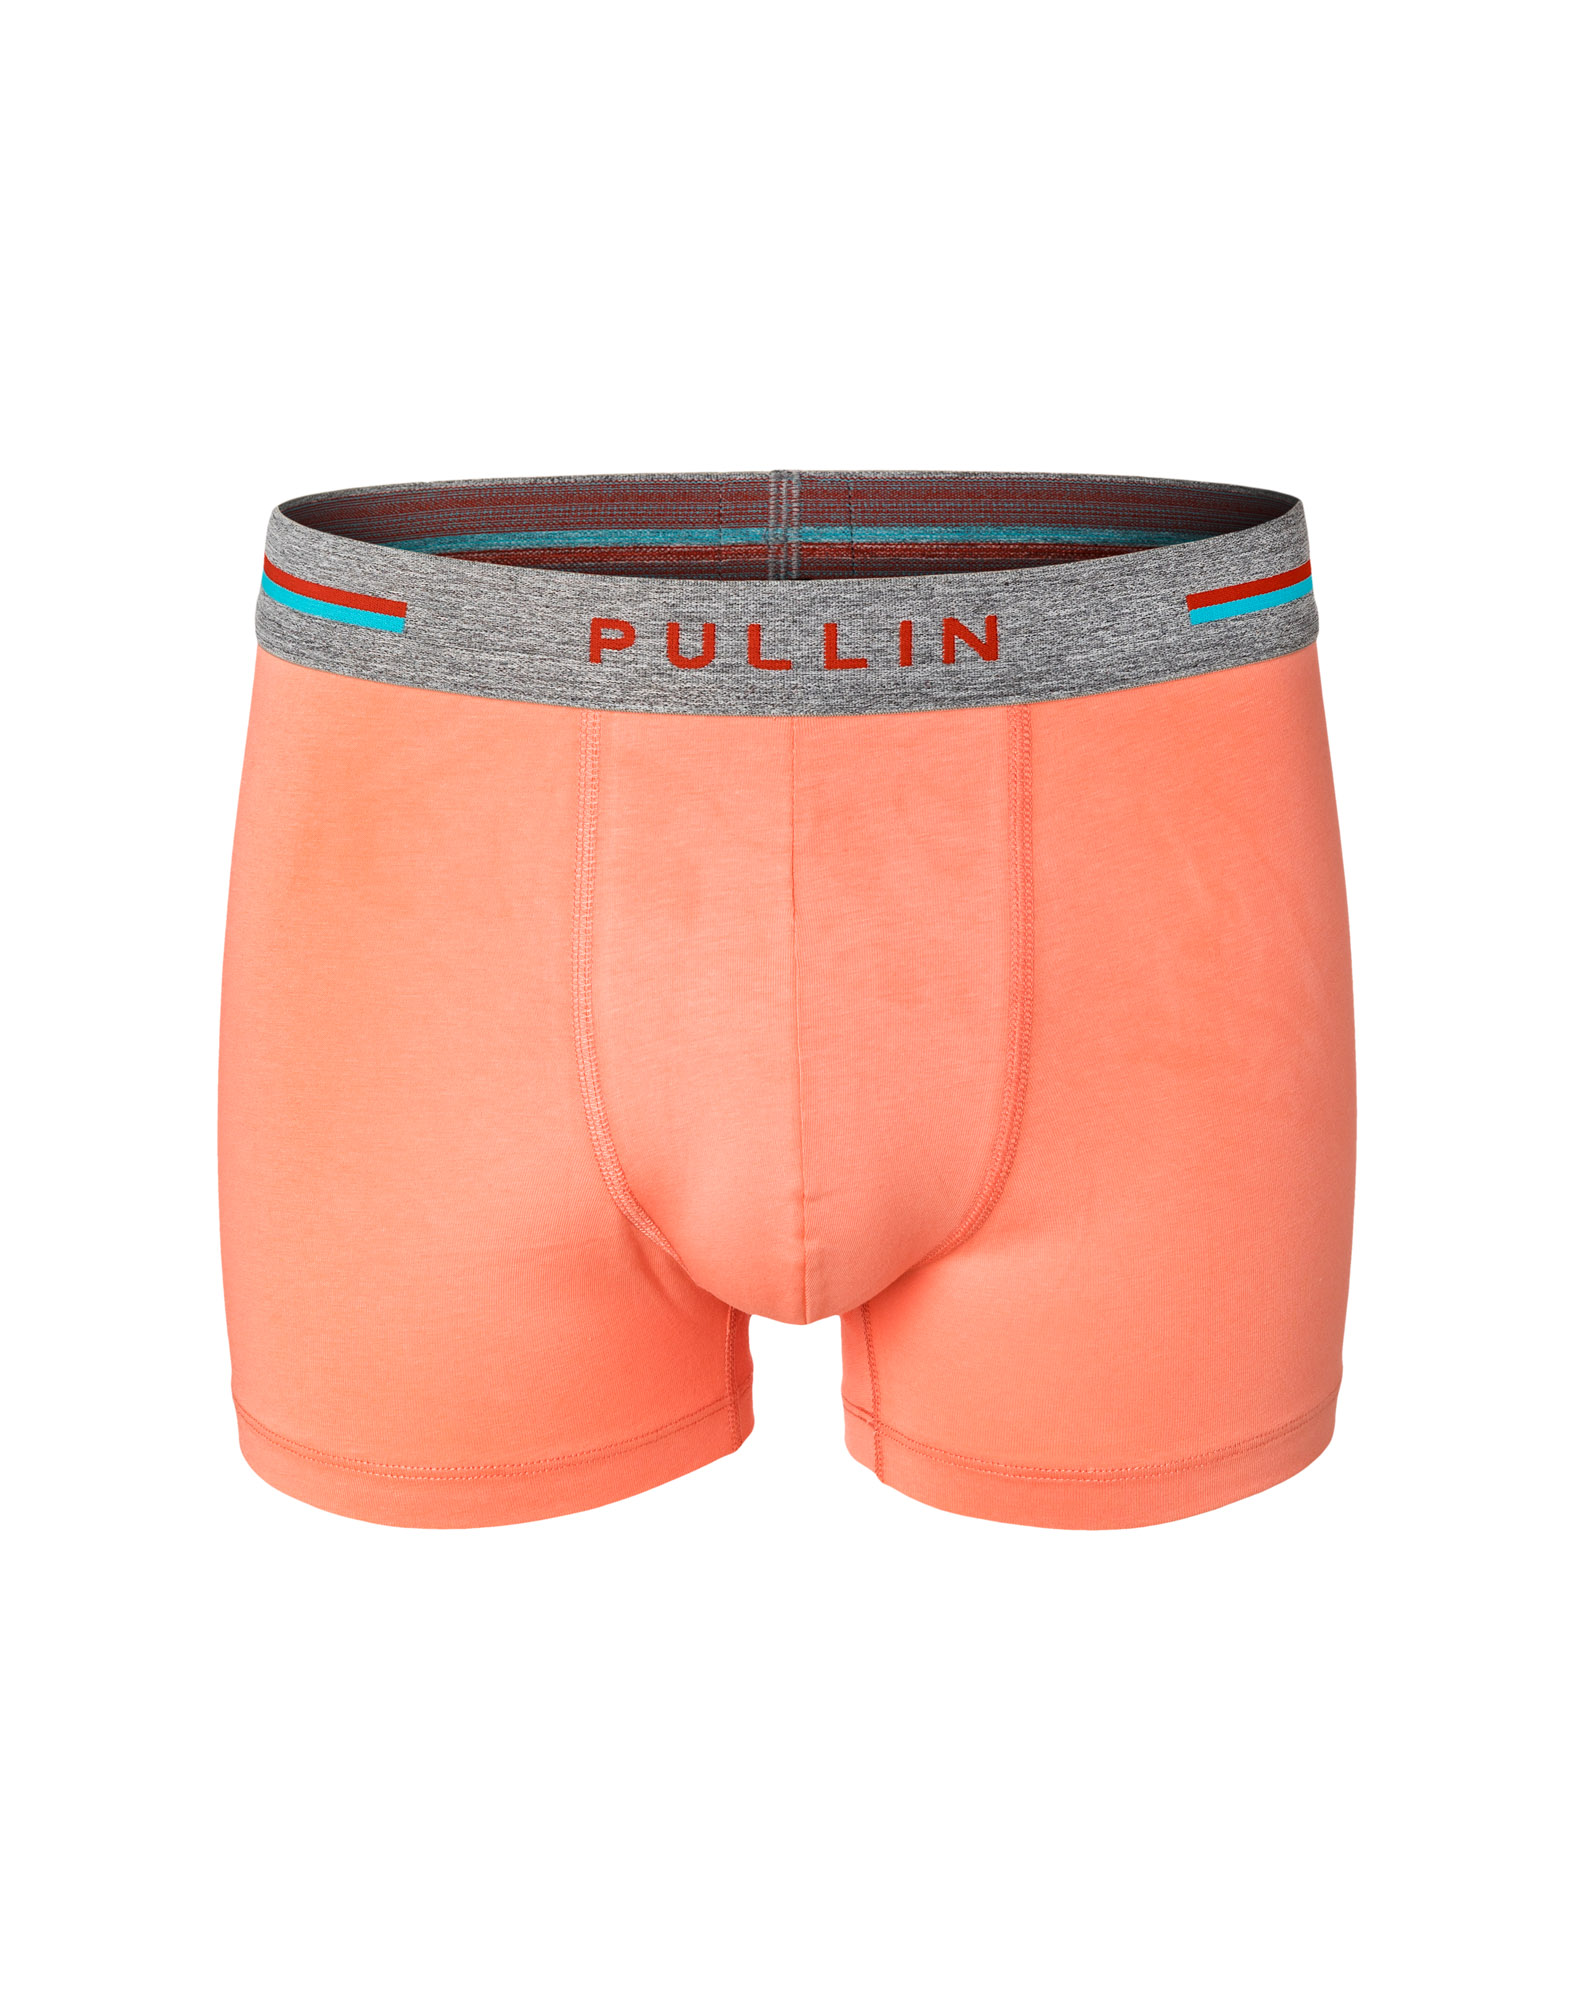 https://www.pull-in.com/media/catalog/product/m/a/mascot-coral-1.jpg